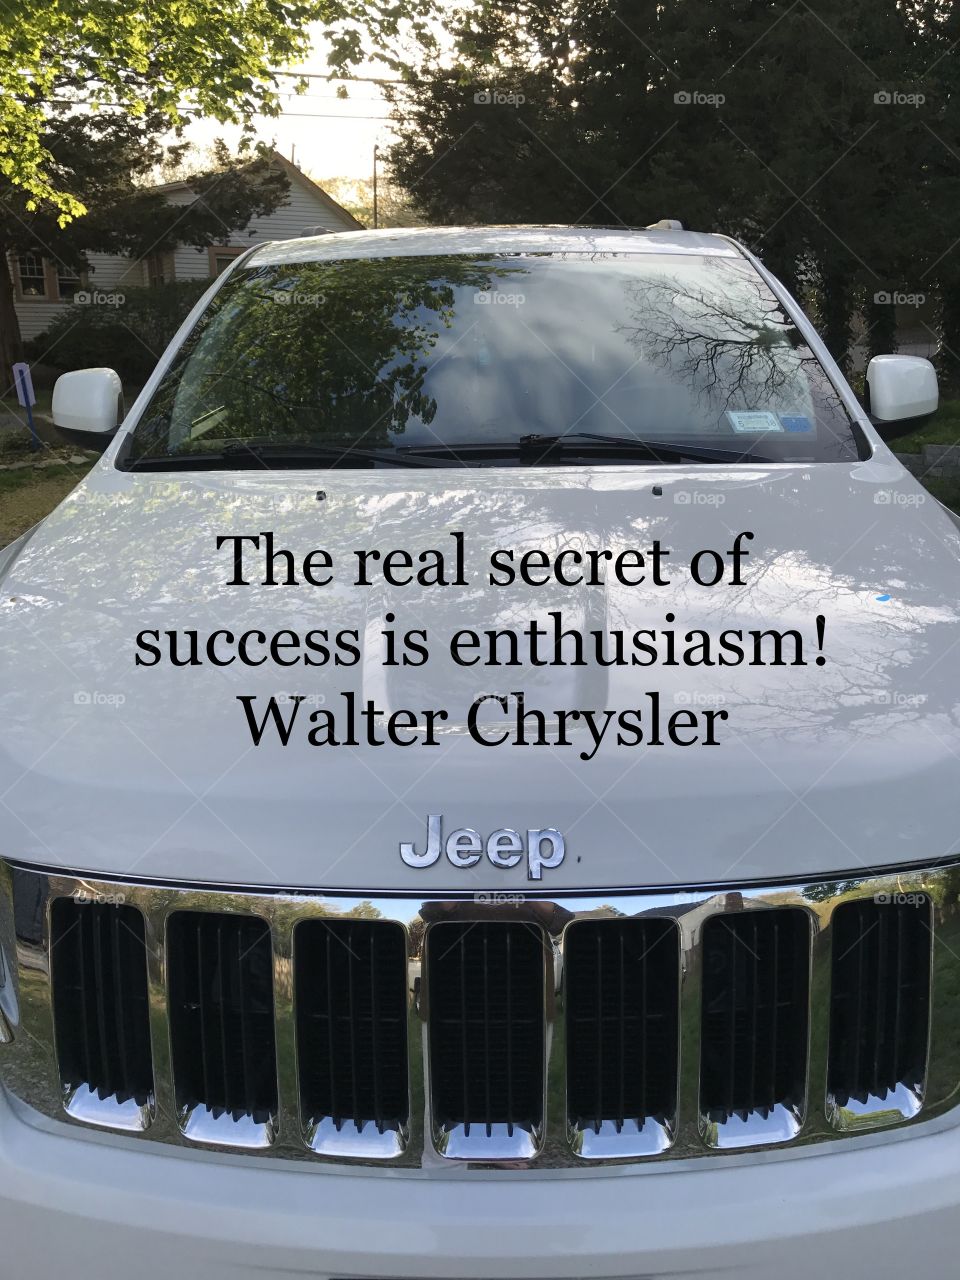 The real secret of success is enthusiasm!  Walter Chrysler